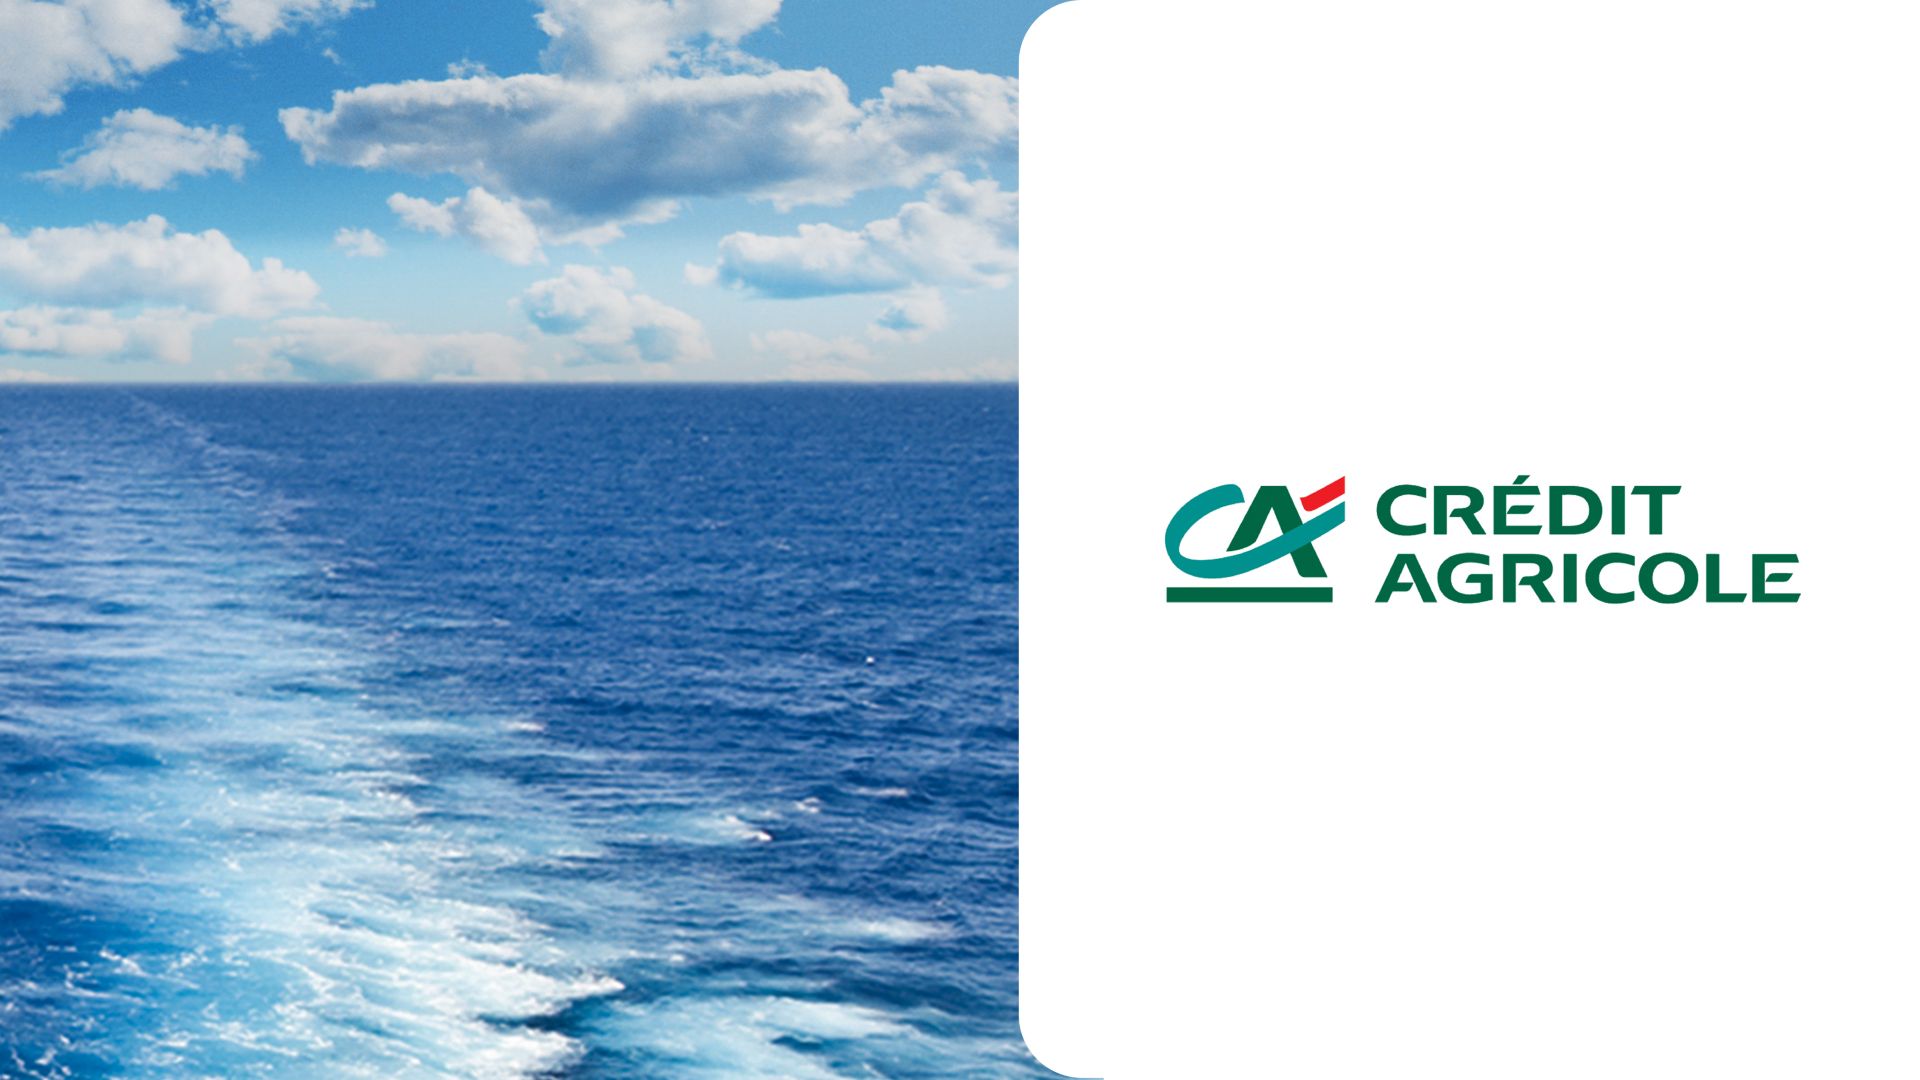 Special offers for Credit Agricole members